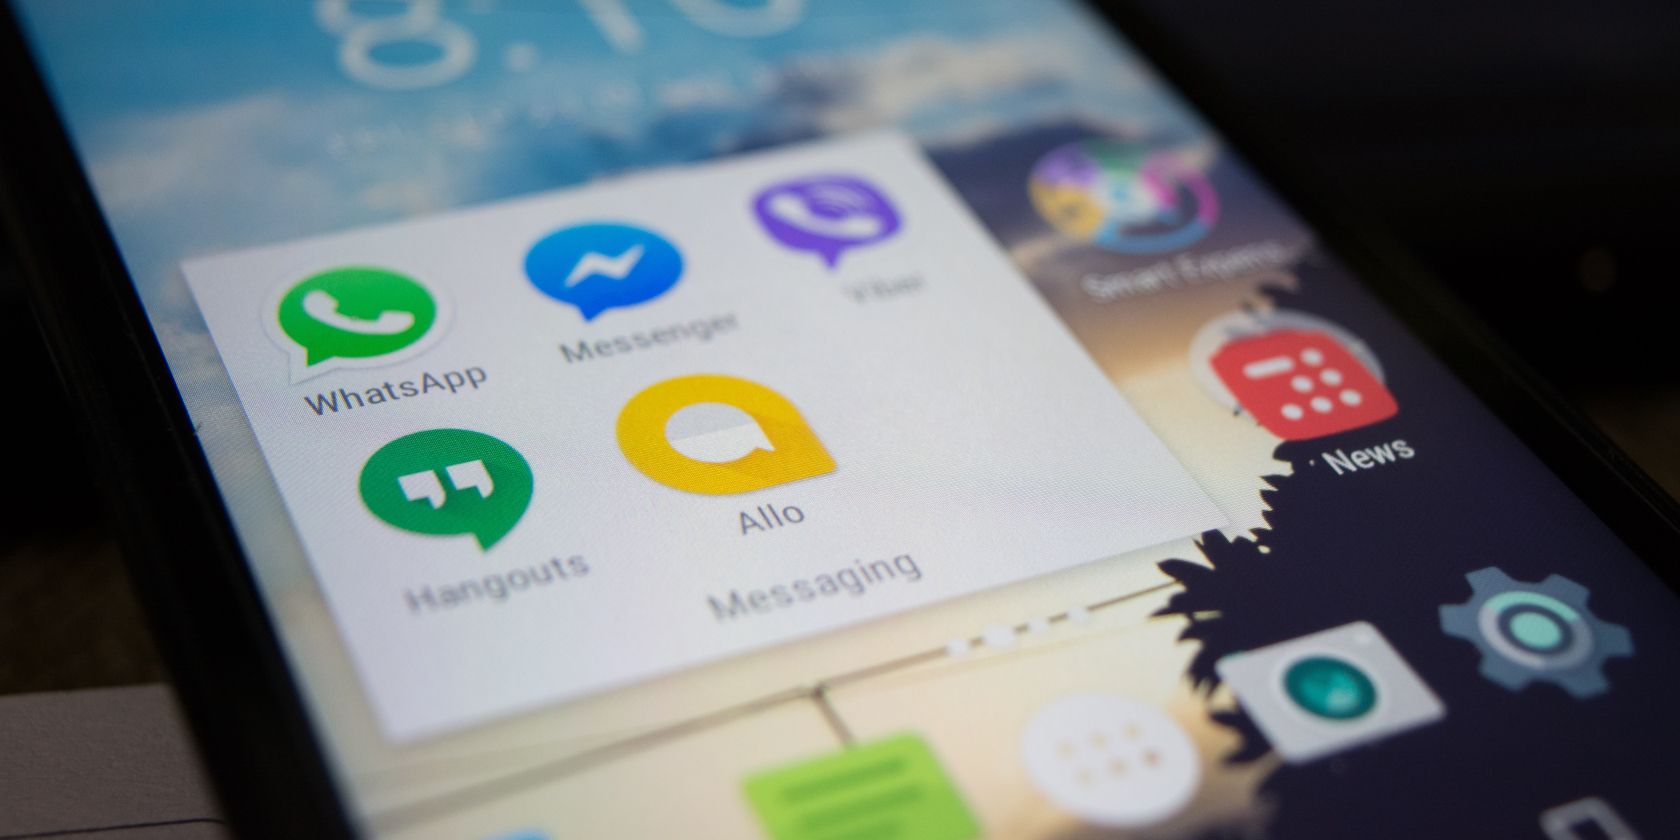 Messaging apps on Android phone